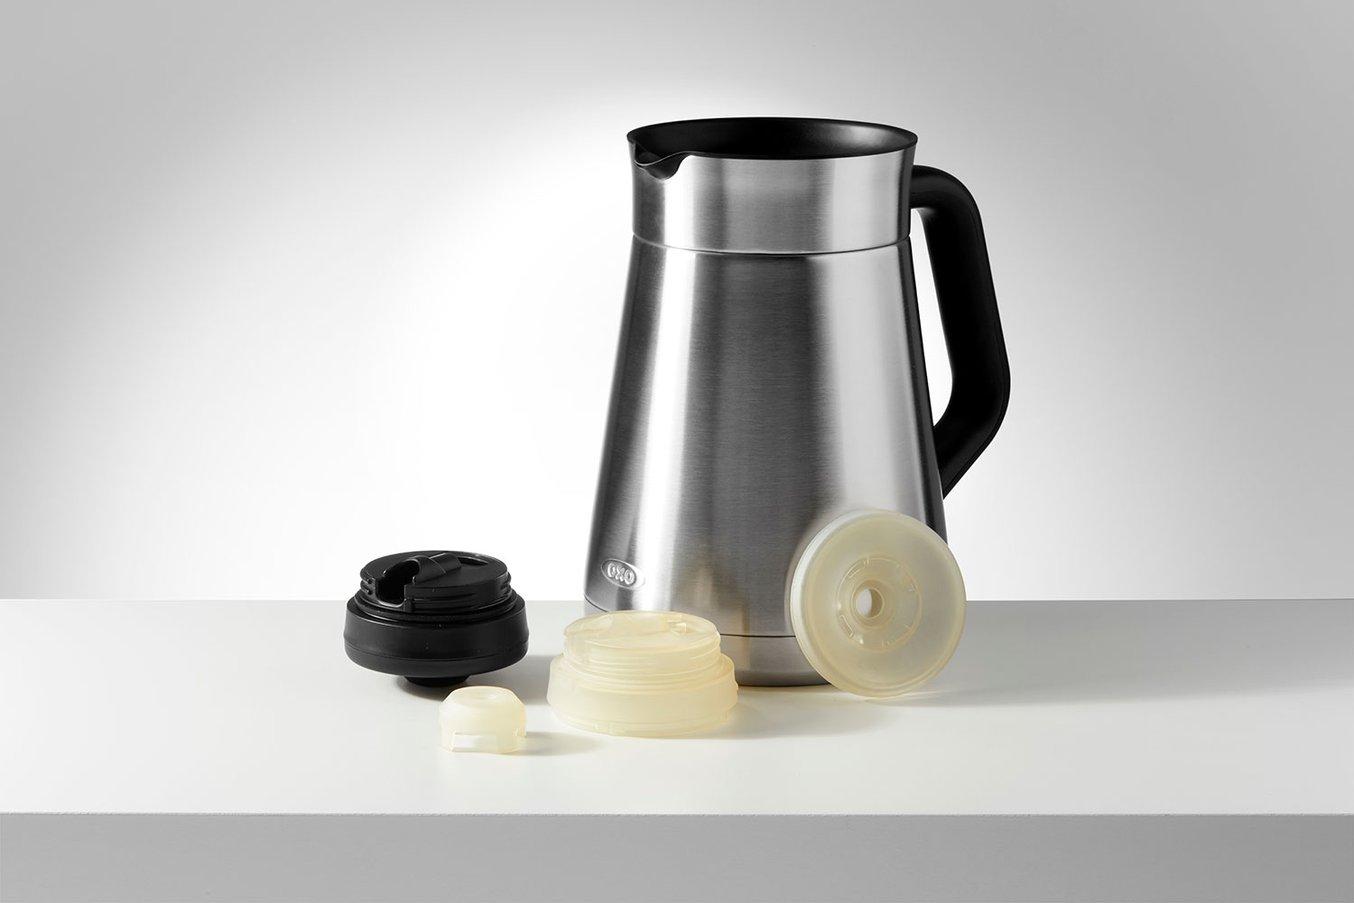 During the design process for their Barista Brain 9 Cup Coffee Maker, OXO used the Form 2 and High Temp Resin to prototype functional parts that needed to come into contact with boiling water.